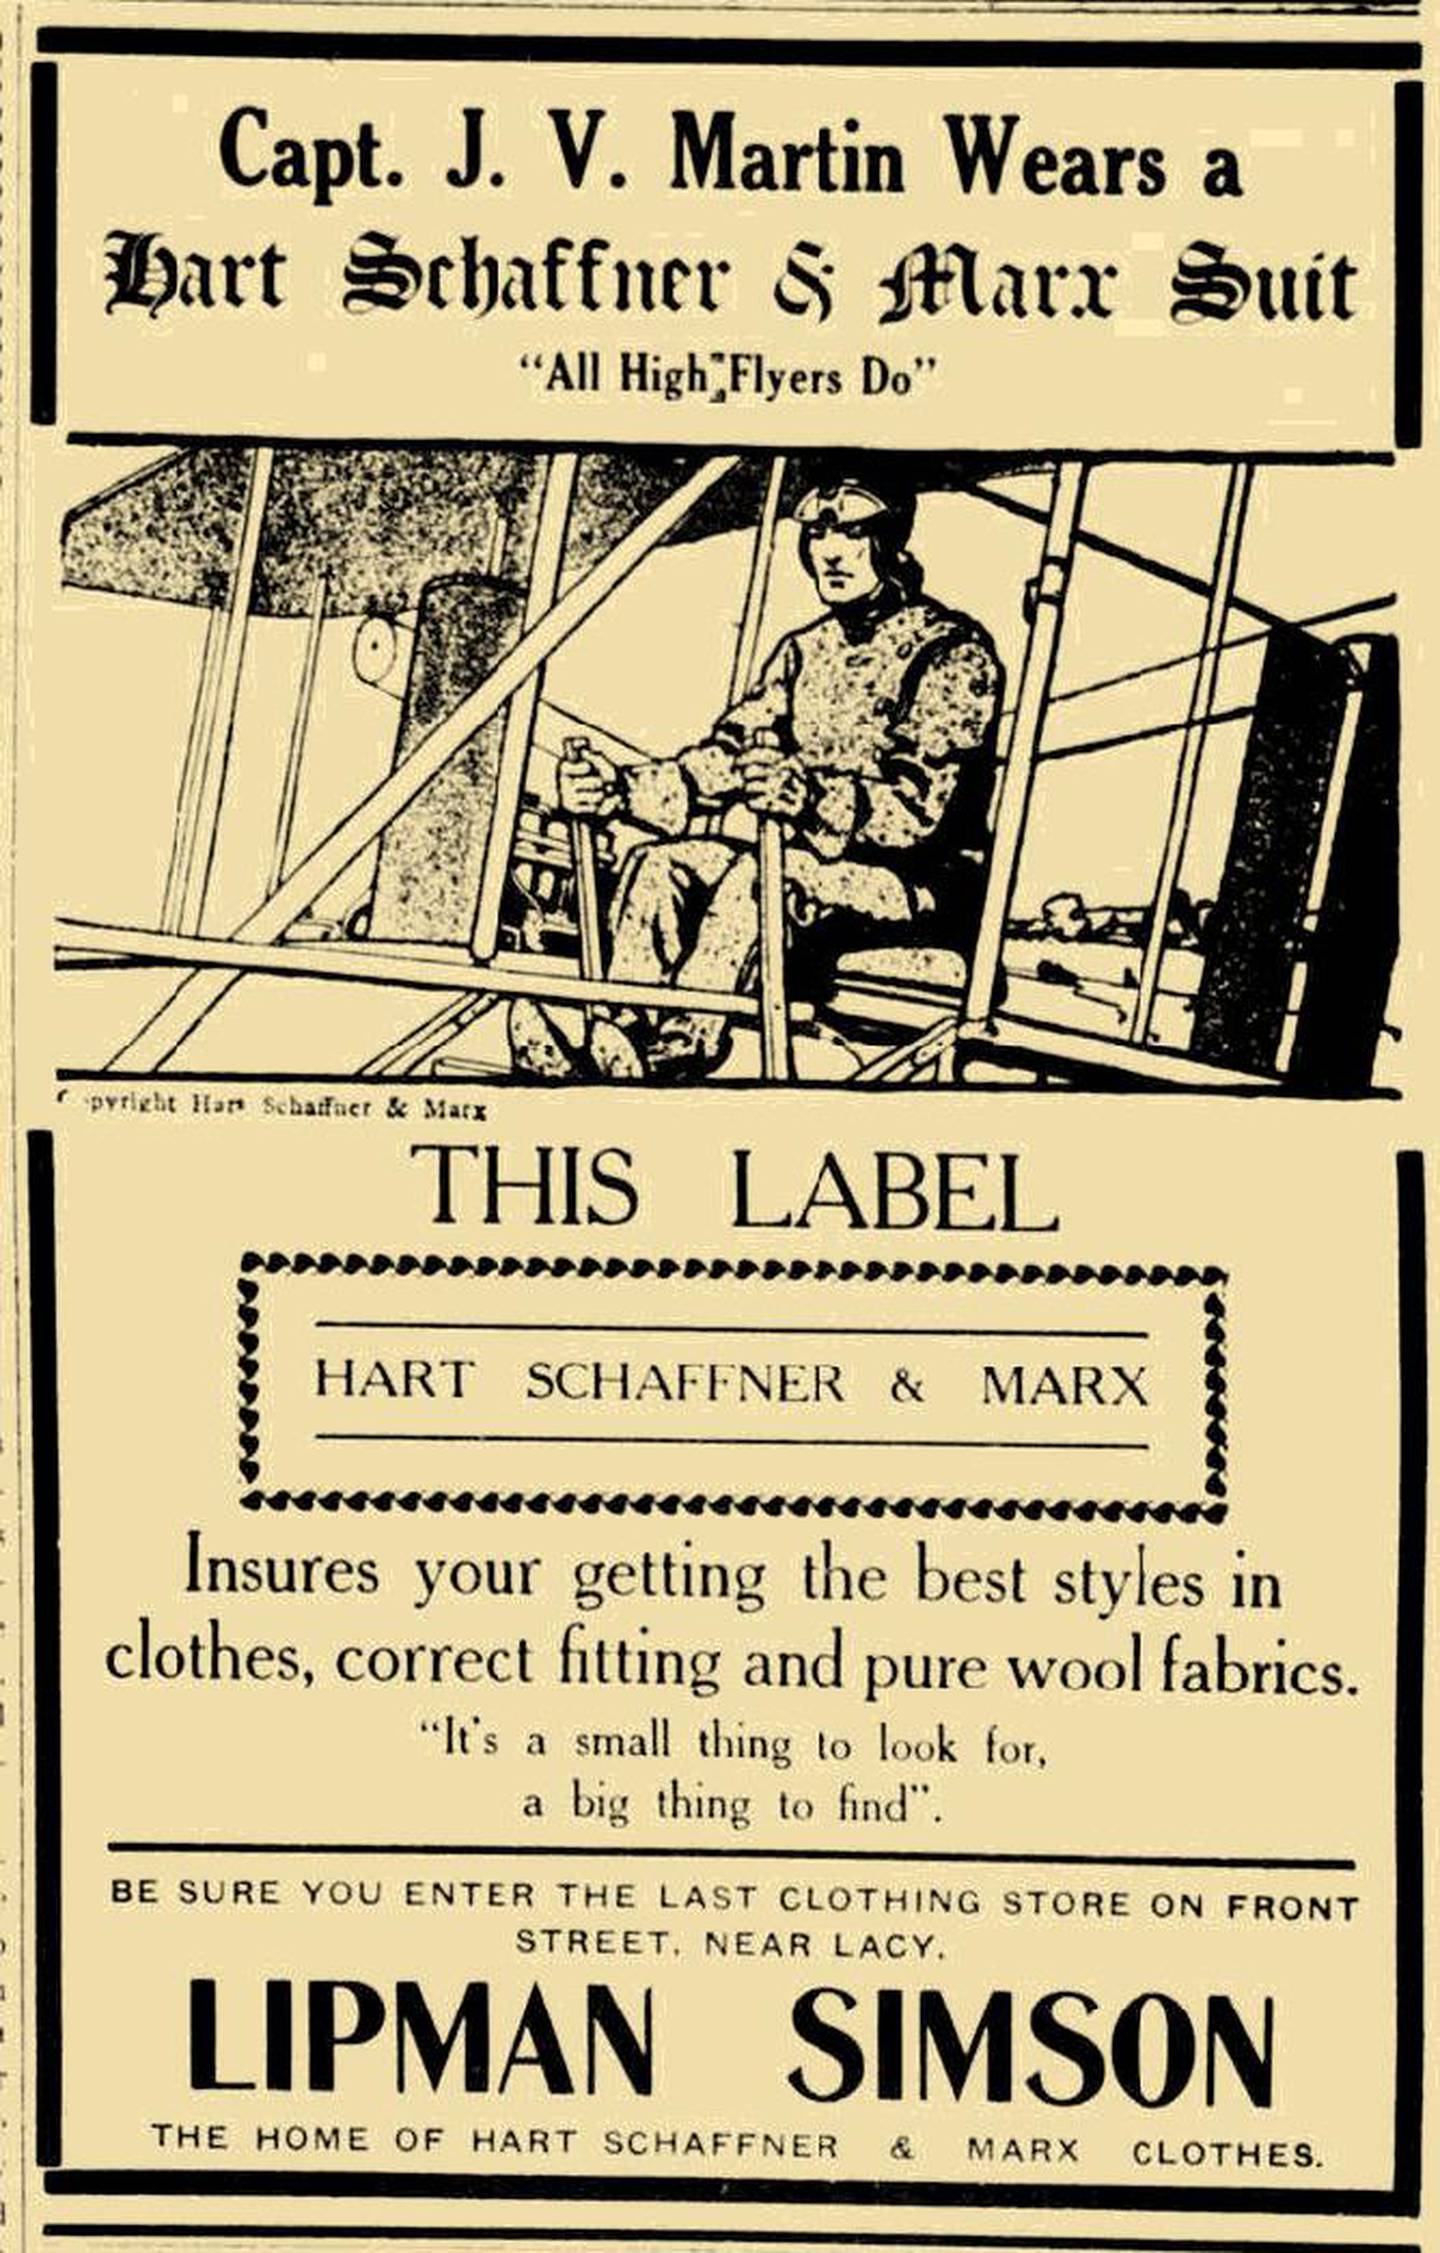 An advertisement using aviator James Martin's name and likeness to sell clothes